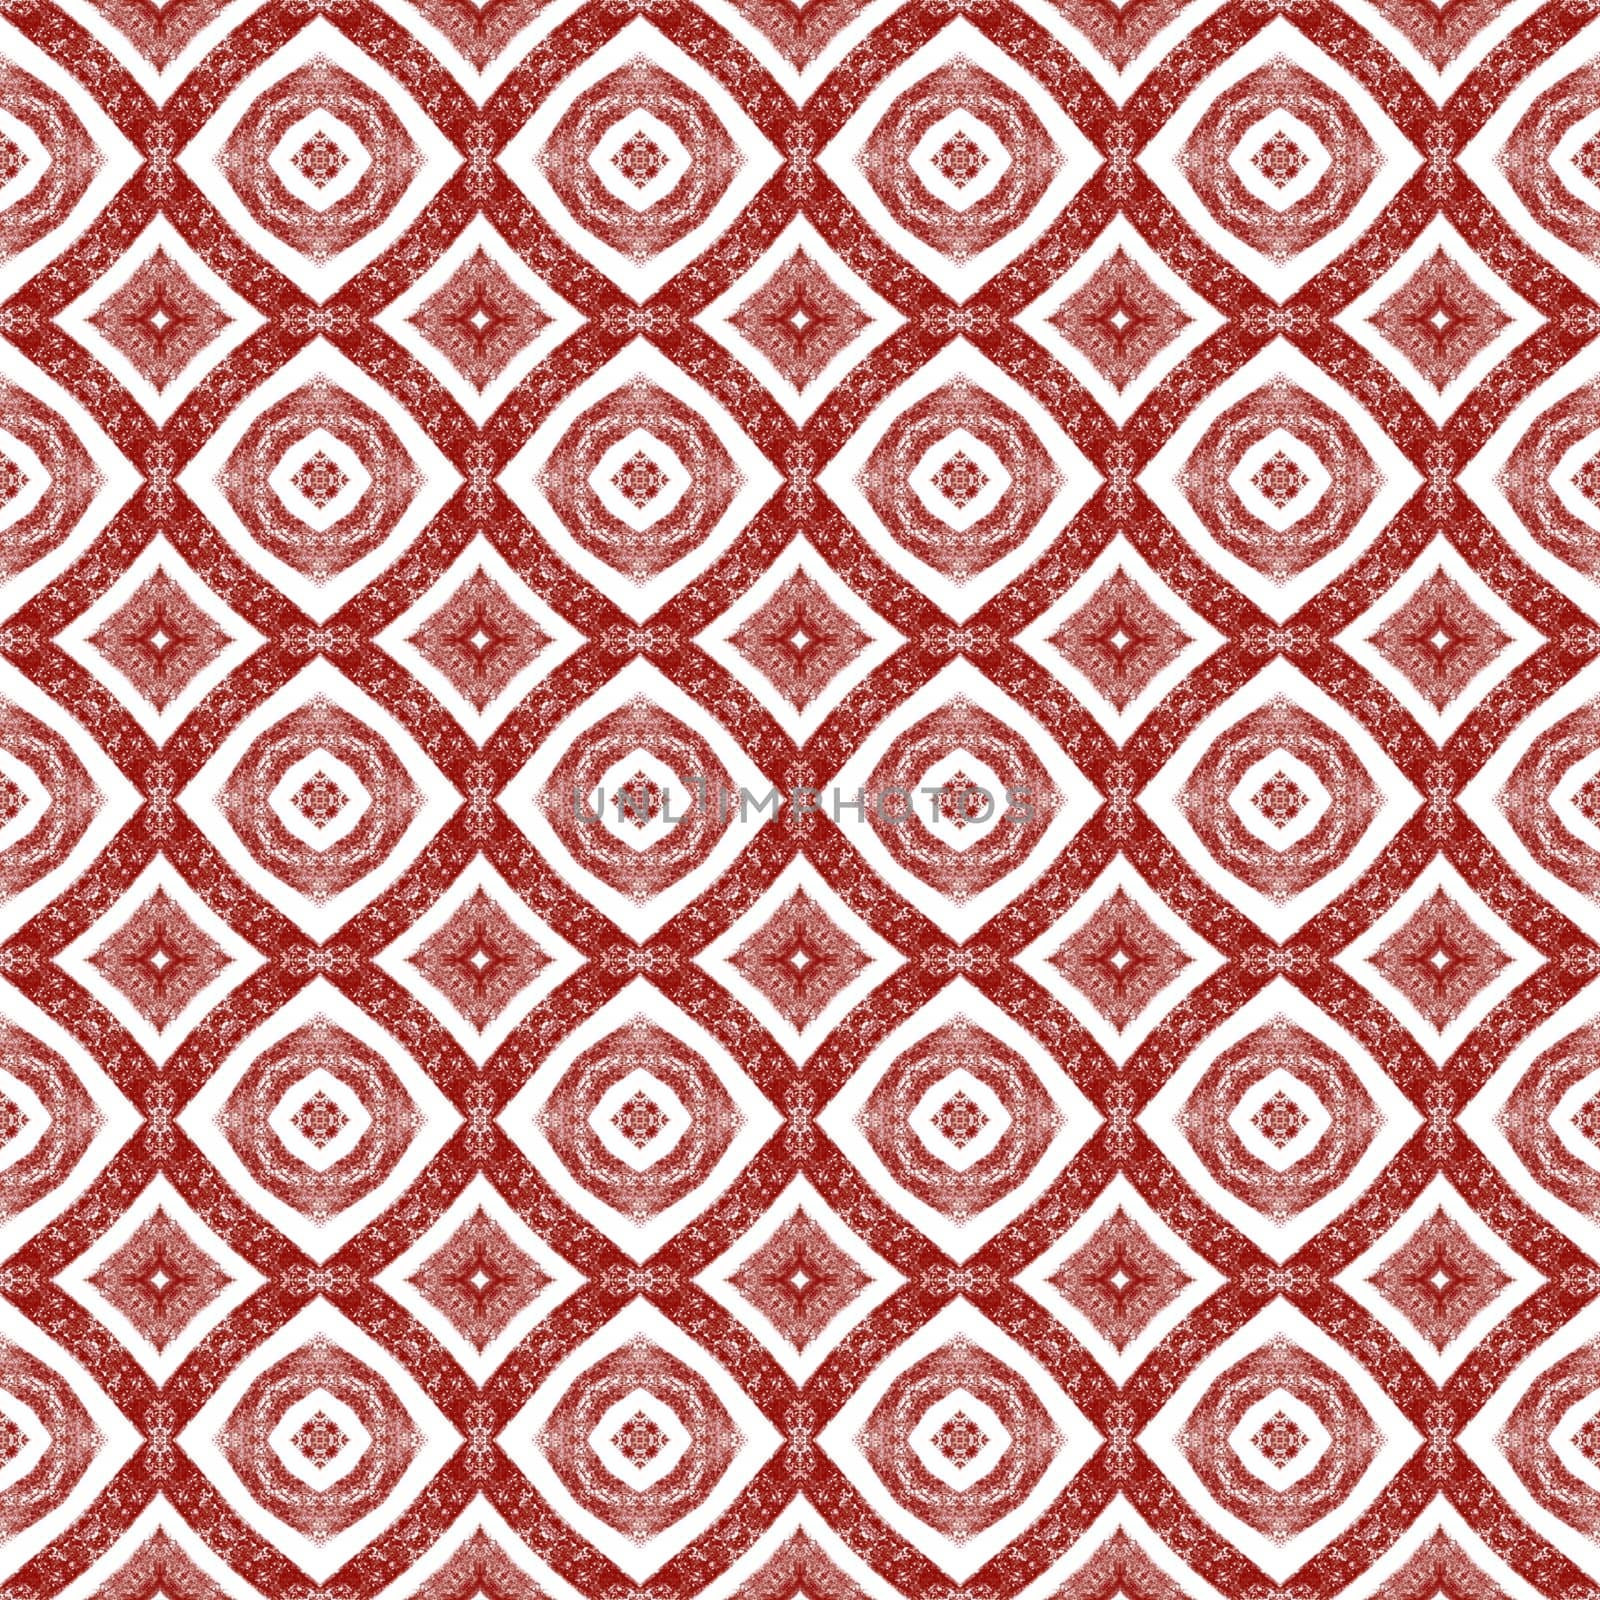 Textured stripes pattern. Wine red symmetrical by beginagain